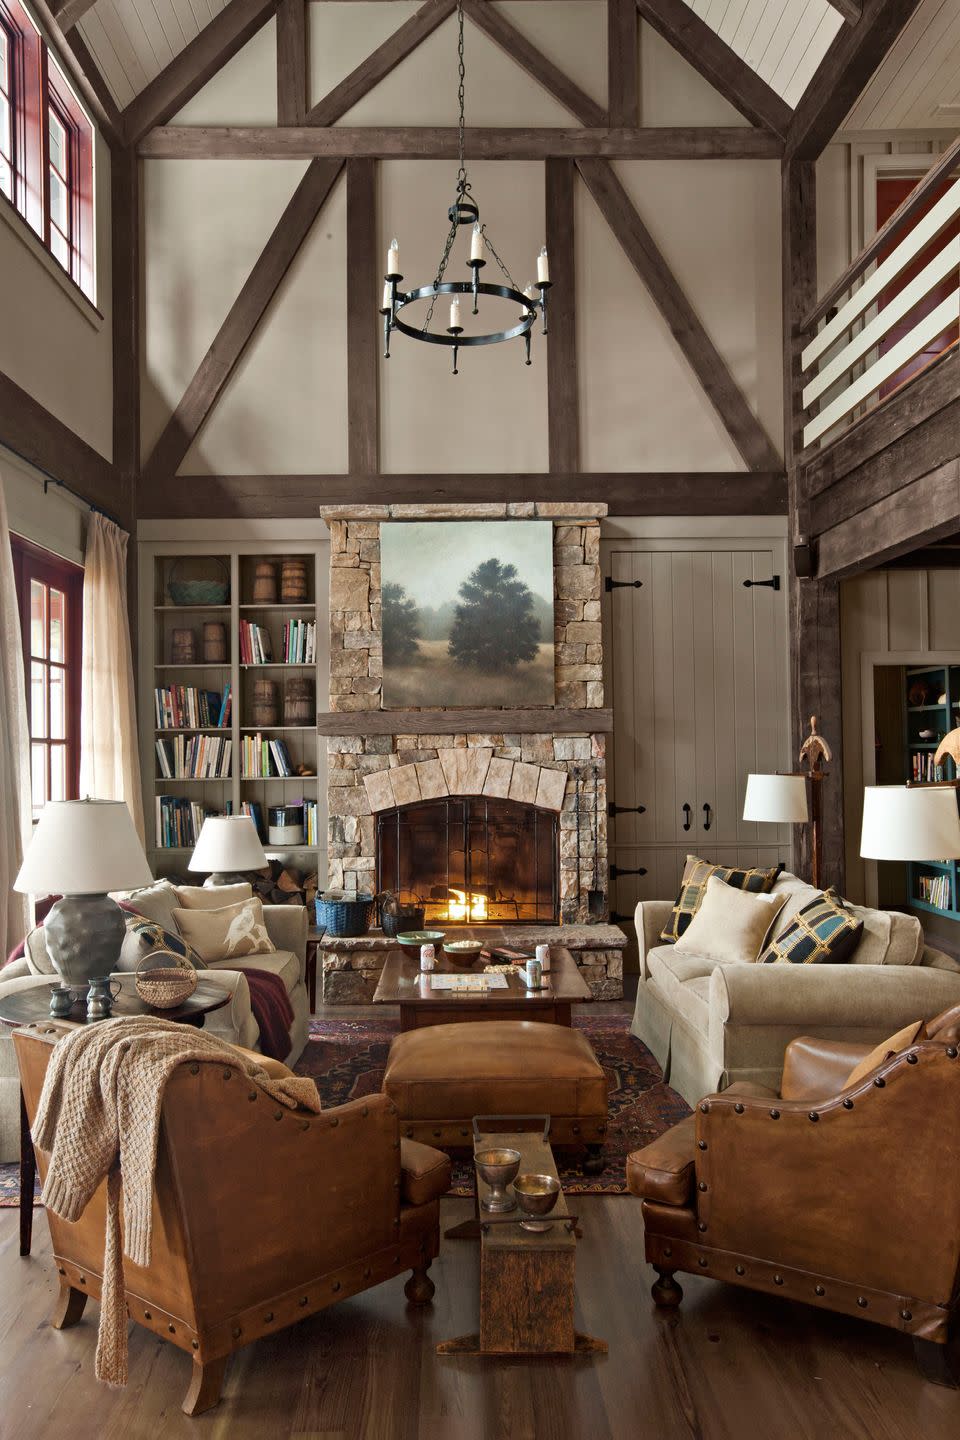 <p>In this <a href="https://www.countryliving.com/home-design/house-tours/g1381/rustic-lake-house-decorating-ideas/" rel="nofollow noopener" target="_blank" data-ylk="slk:Georgia lake house" class="link ">Georgia lake house</a>, appealingly asymmetrical built-ins—one with hidden storage, the other open—flank the great room's fieldstone fireplace. French leather club chairs from <a href="http://www.wyattchildsinc.com/" rel="nofollow noopener" target="_blank" data-ylk="slk:Wyatt Childs" class="link ">Wyatt Childs</a>, plus a pair of <a href="http://www.mgbwhome.com/" rel="nofollow noopener" target="_blank" data-ylk="slk:Mitchell Gold + Bob Williams" class="link ">Mitchell Gold + Bob Williams</a> sofas, serve up plenty of seating.</p>